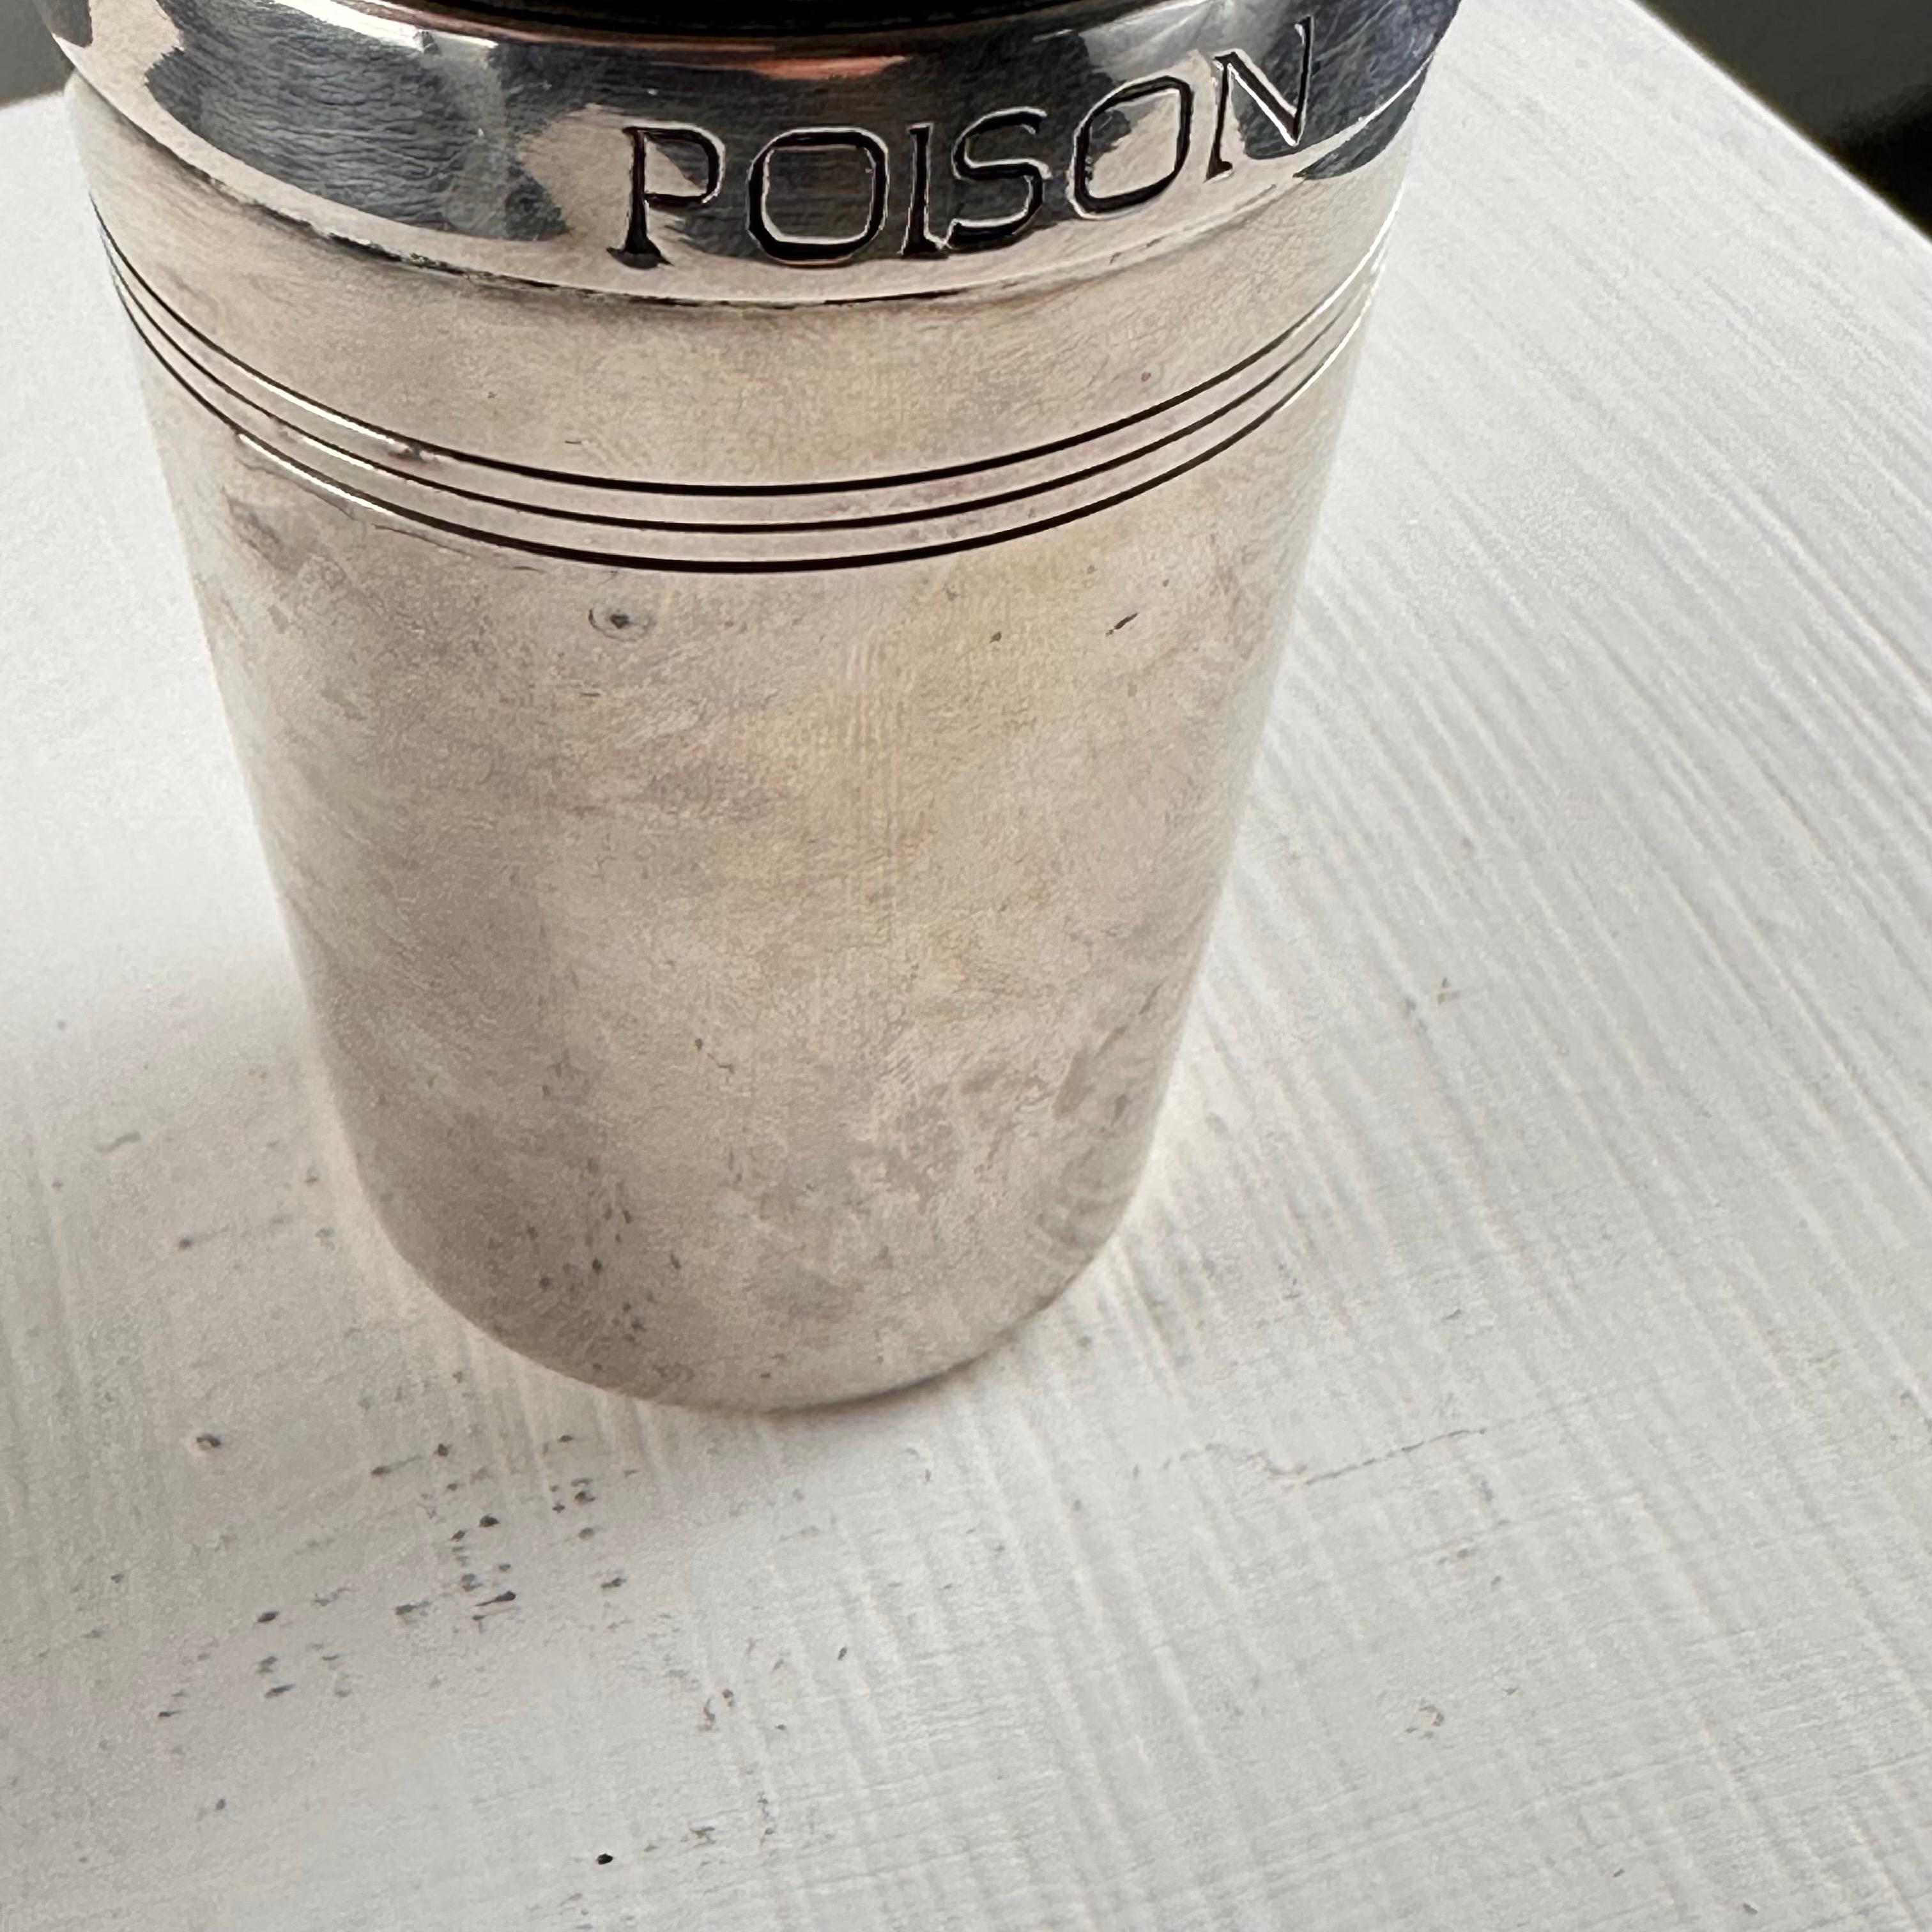 Vintage Christian Dior Round Silver Plate Talcum Pouch Box 'Poison', 1980s For Sale 2